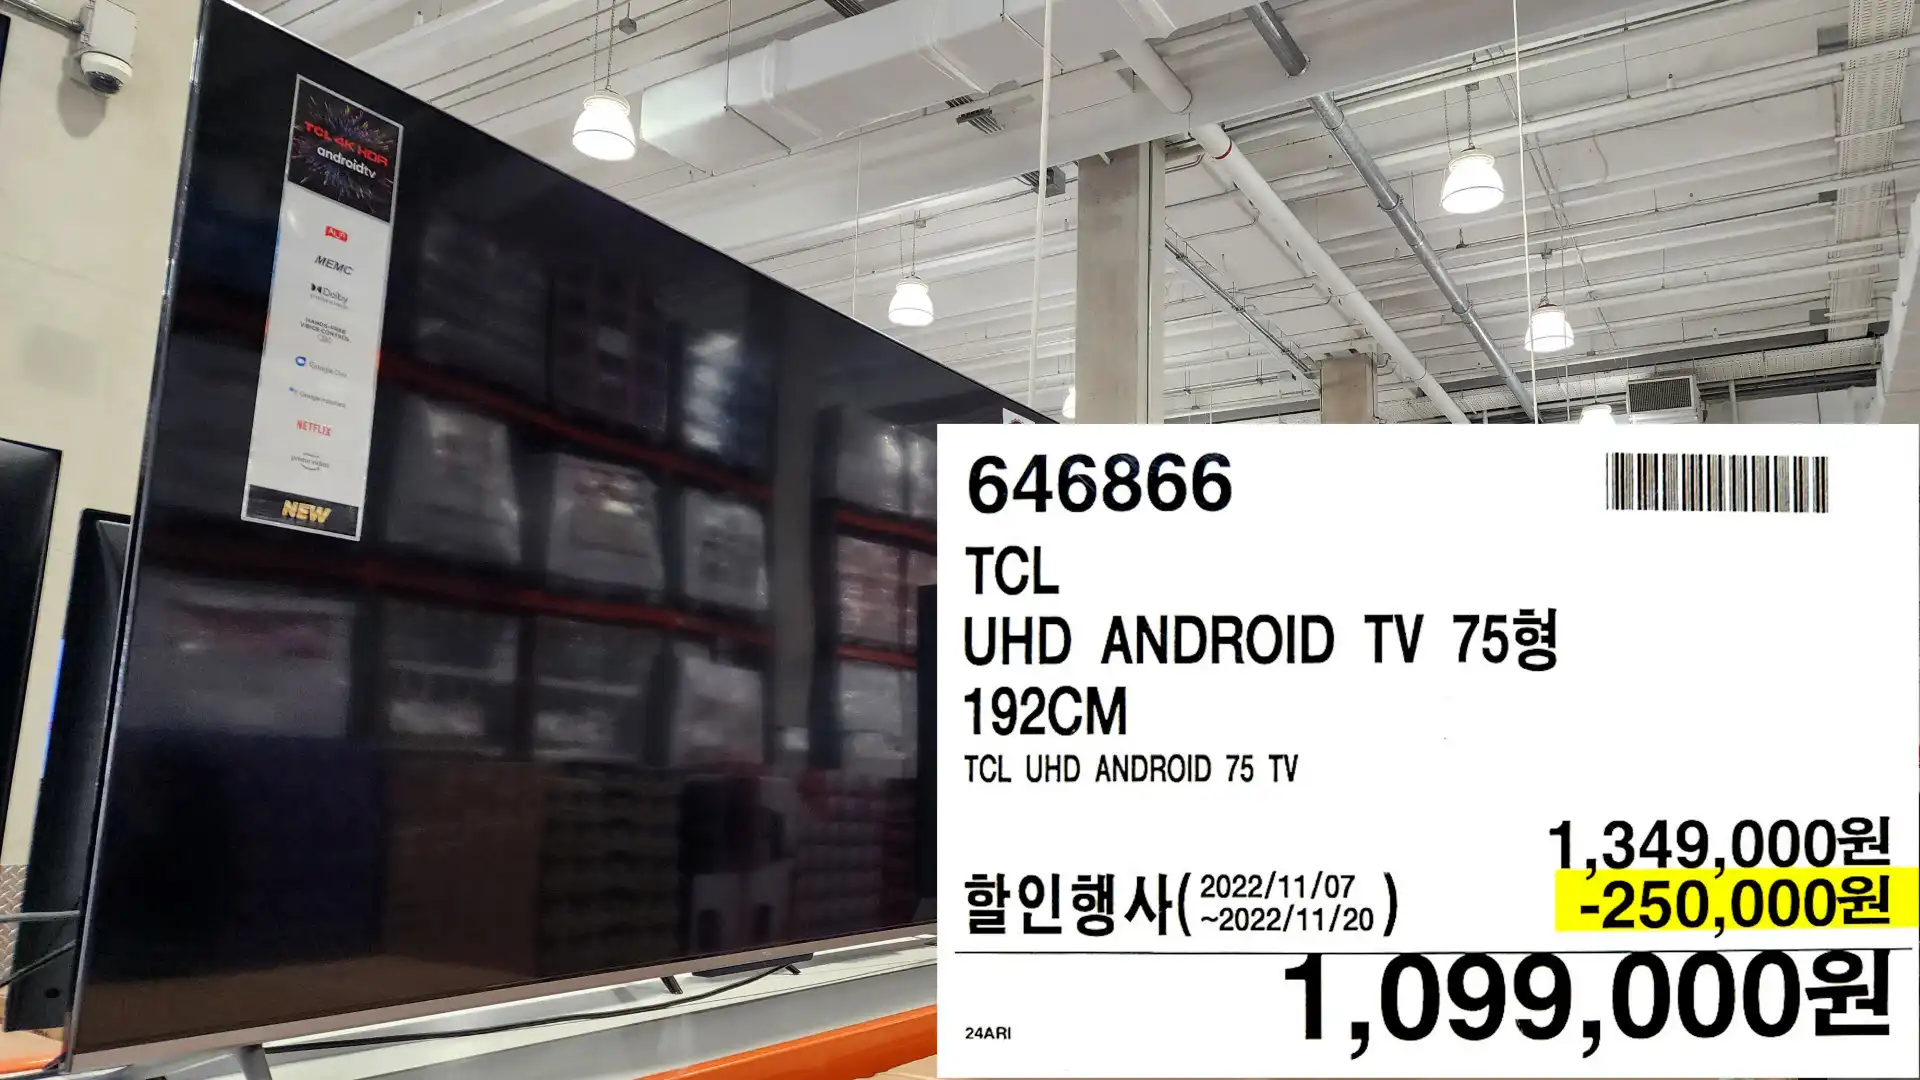 TCL
UHD ANDROID TV 75%
192CM
TCL UHD ANDROID 75 TV
1&#44;099&#44;000원